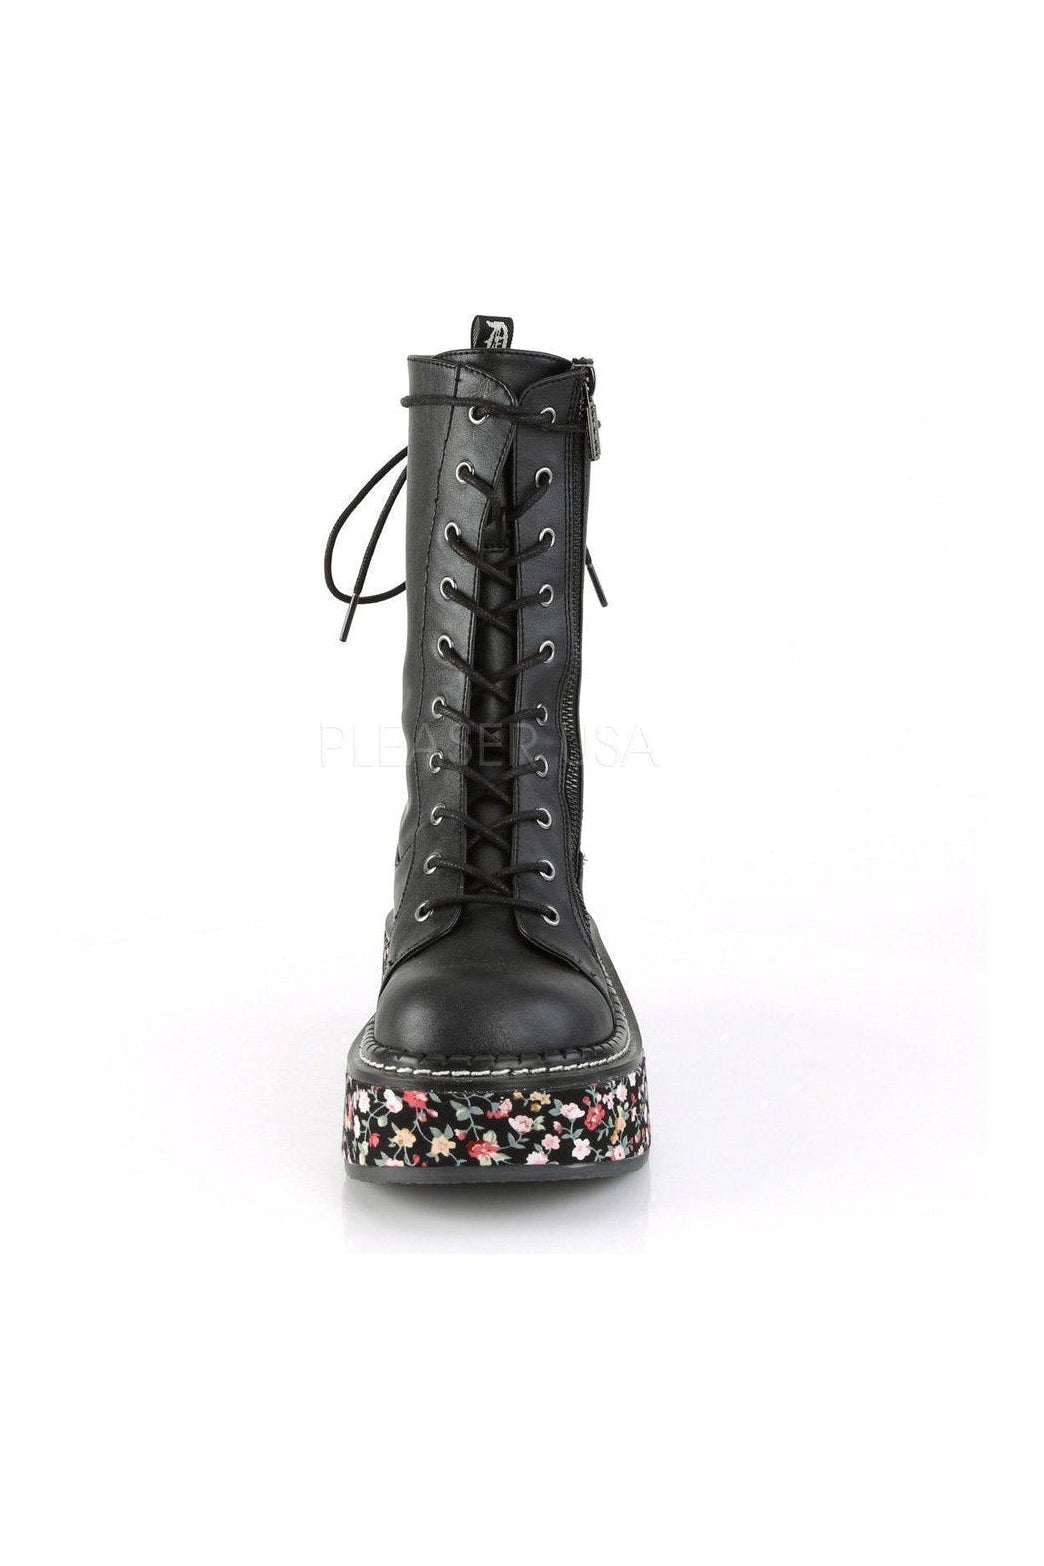 EMILY-350 Demonia Ankle Boot | Black Faux Leather-Demonia-SEXYSHOES.COM